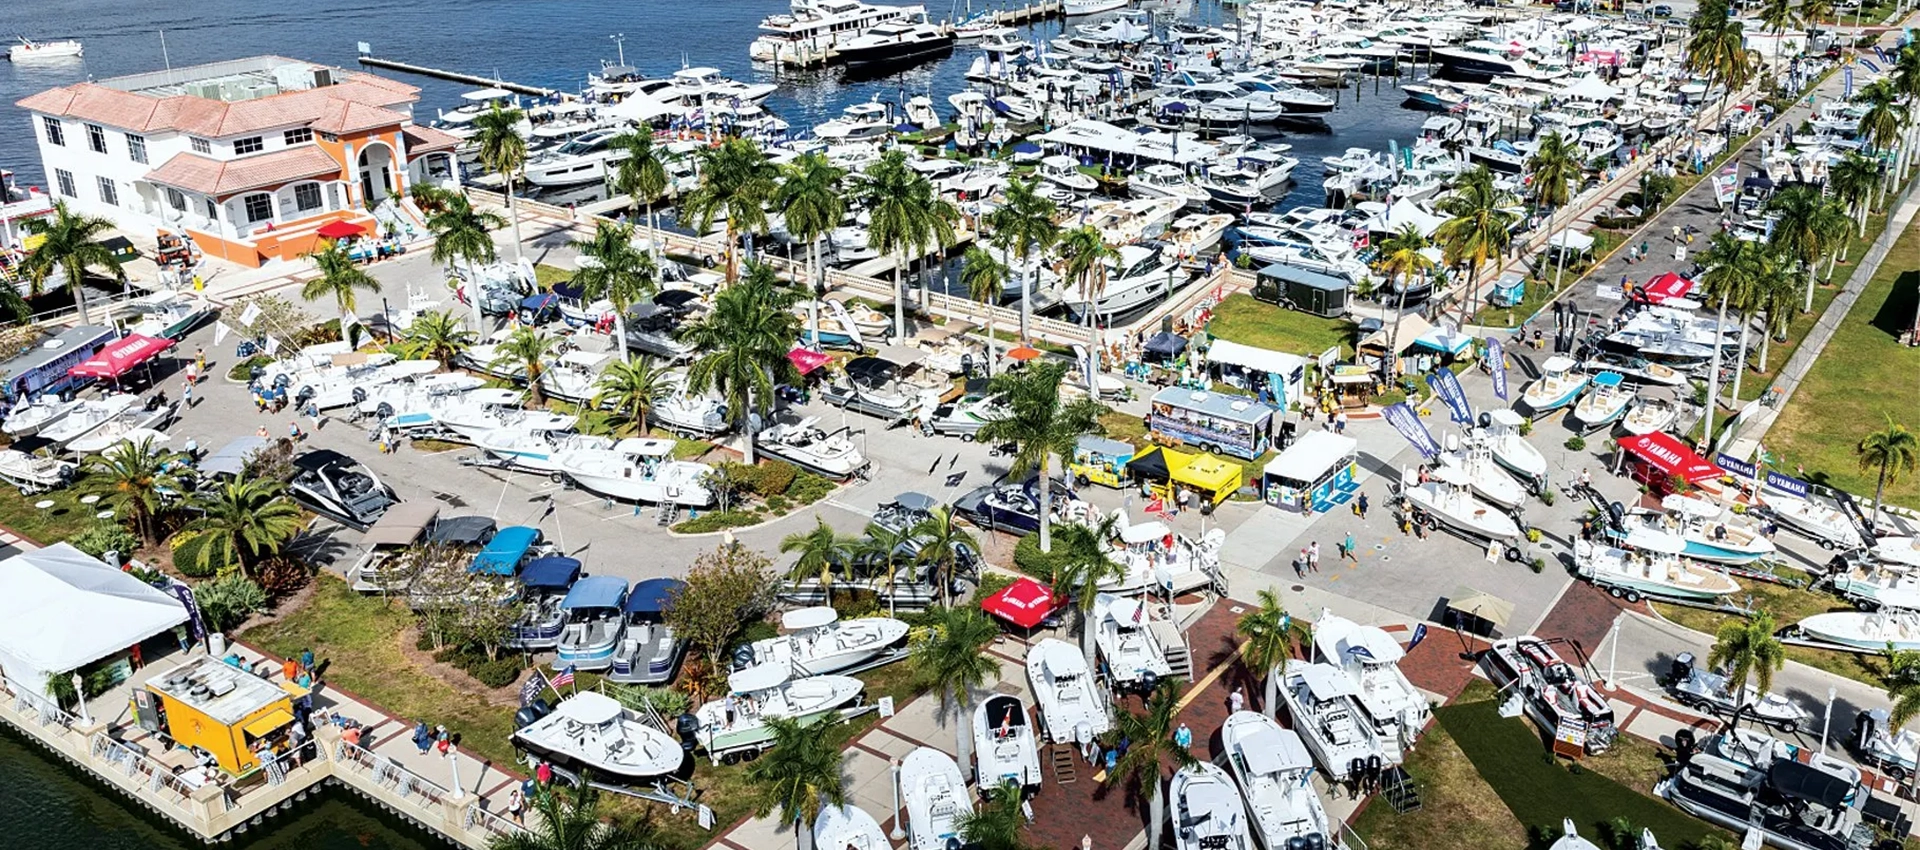 Fort Myers Boat Show